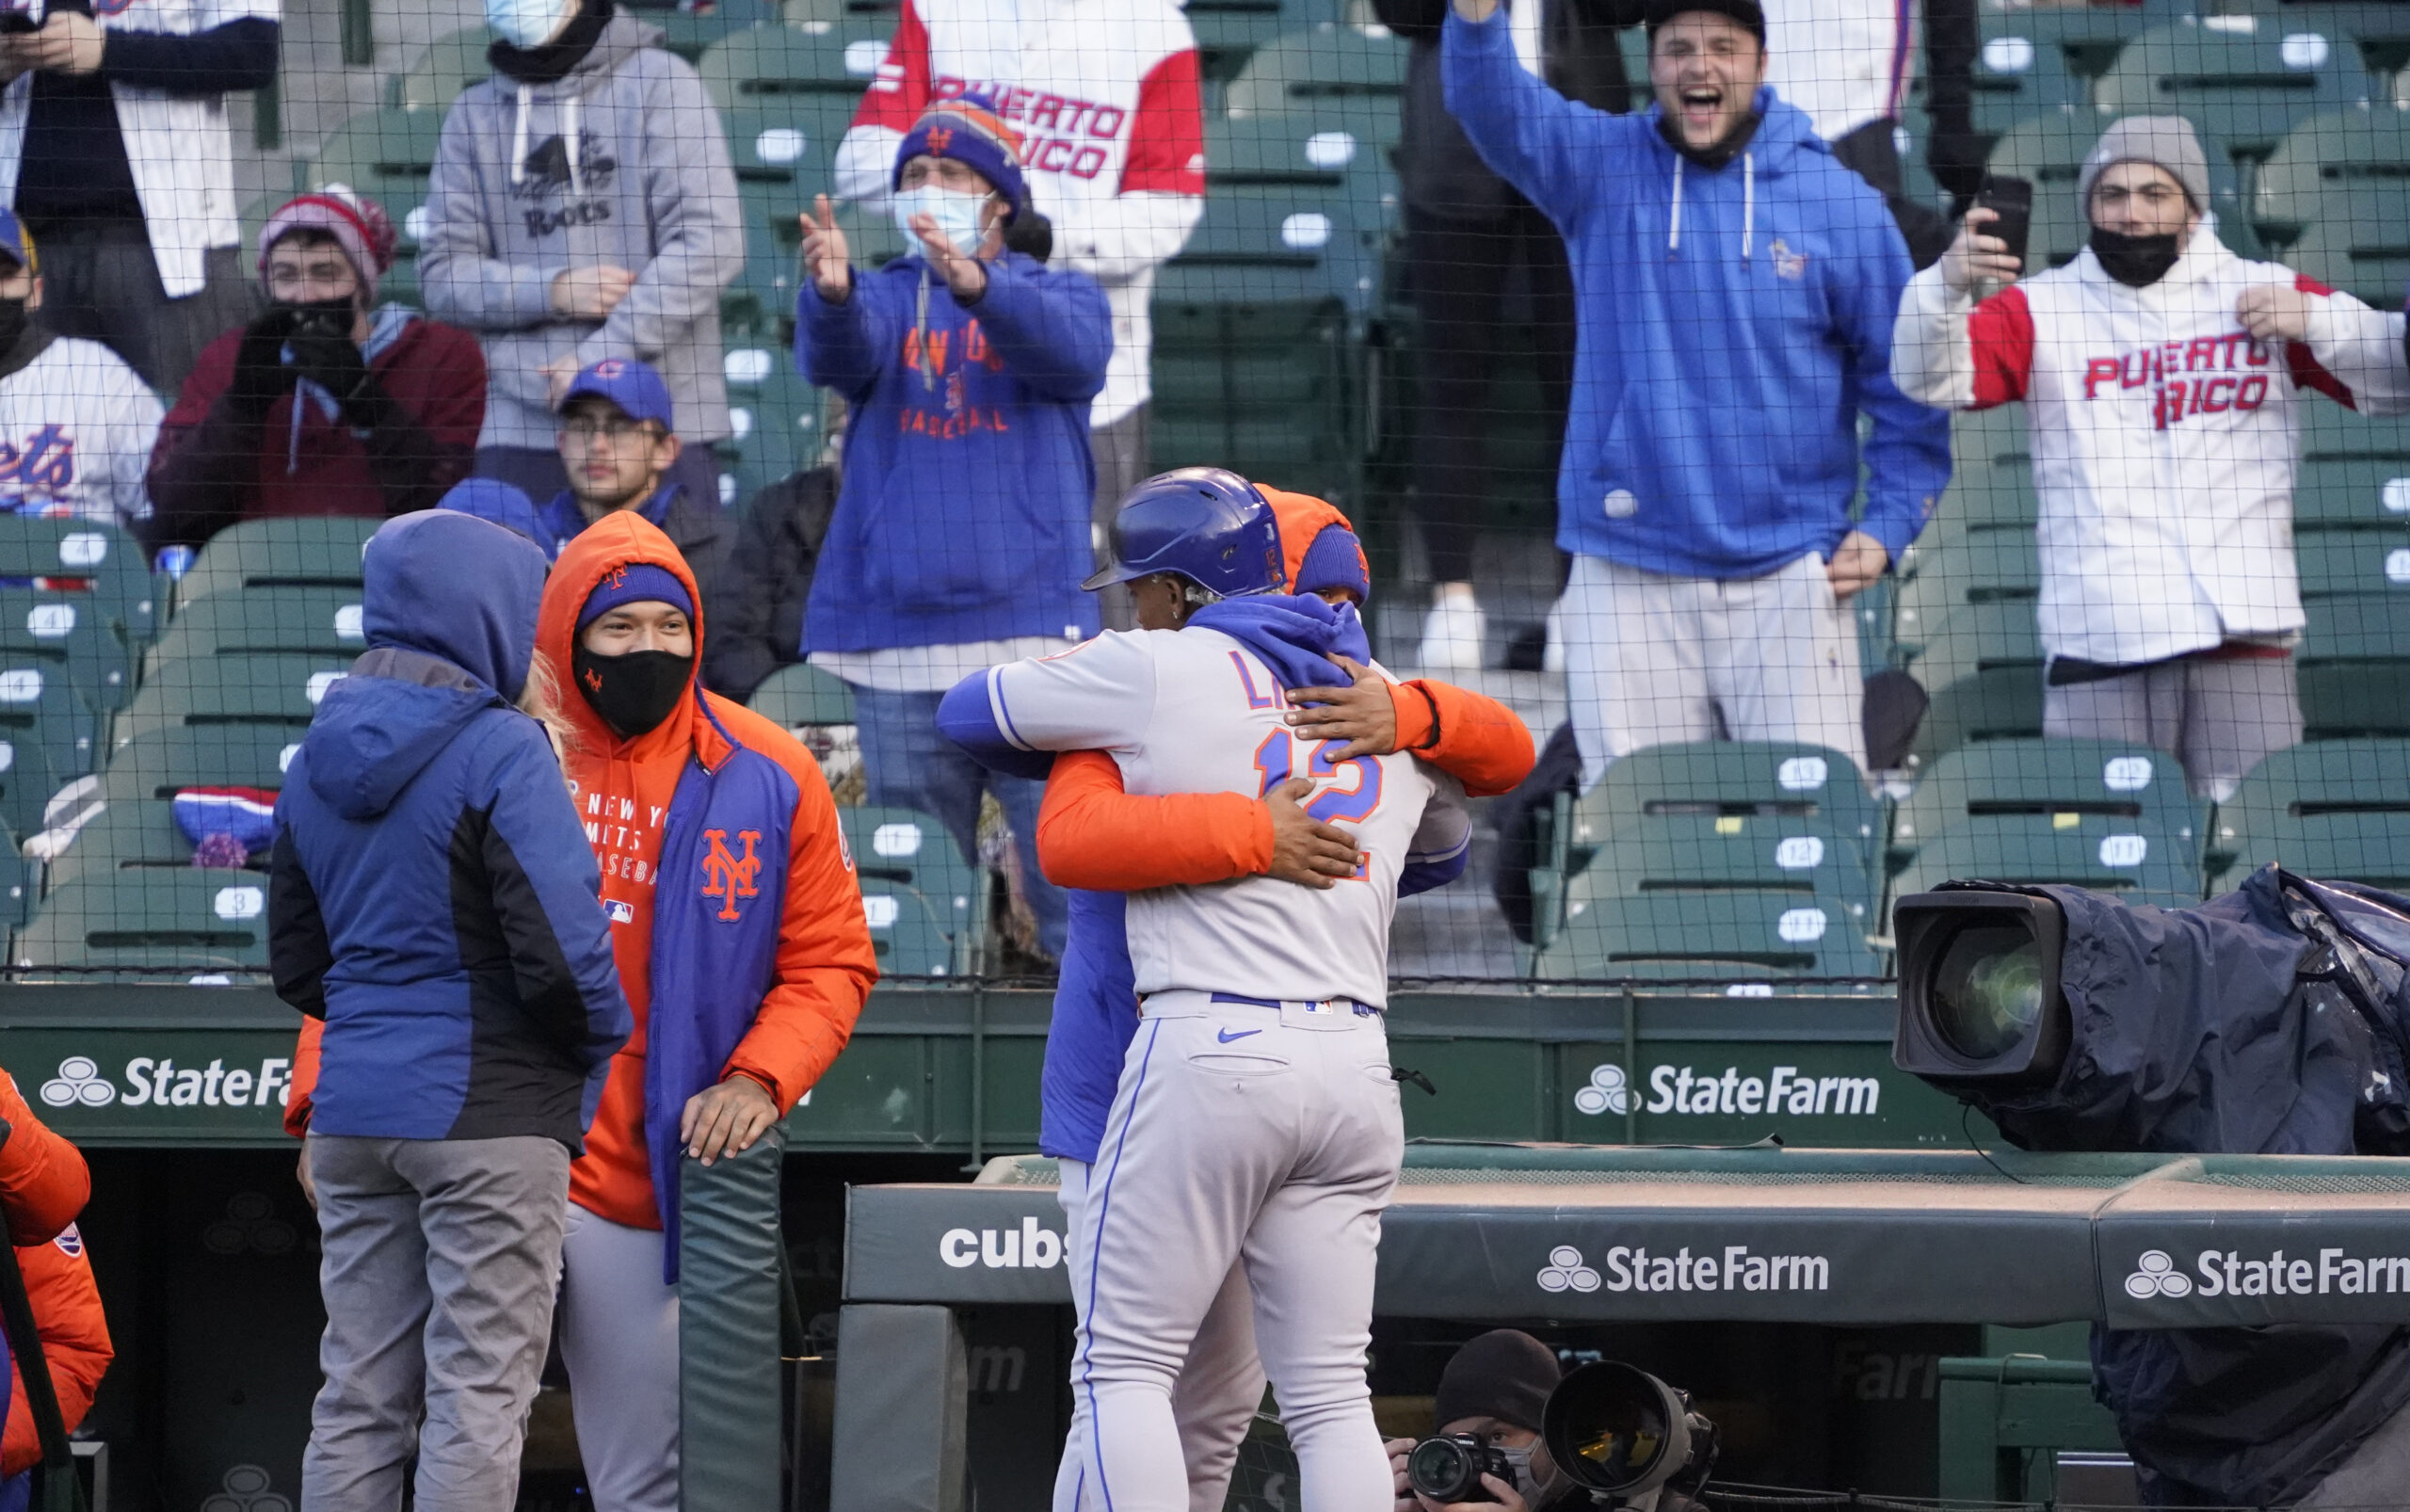 Not Much Goes Right In Mets’ 16-4 Loss To Cubs